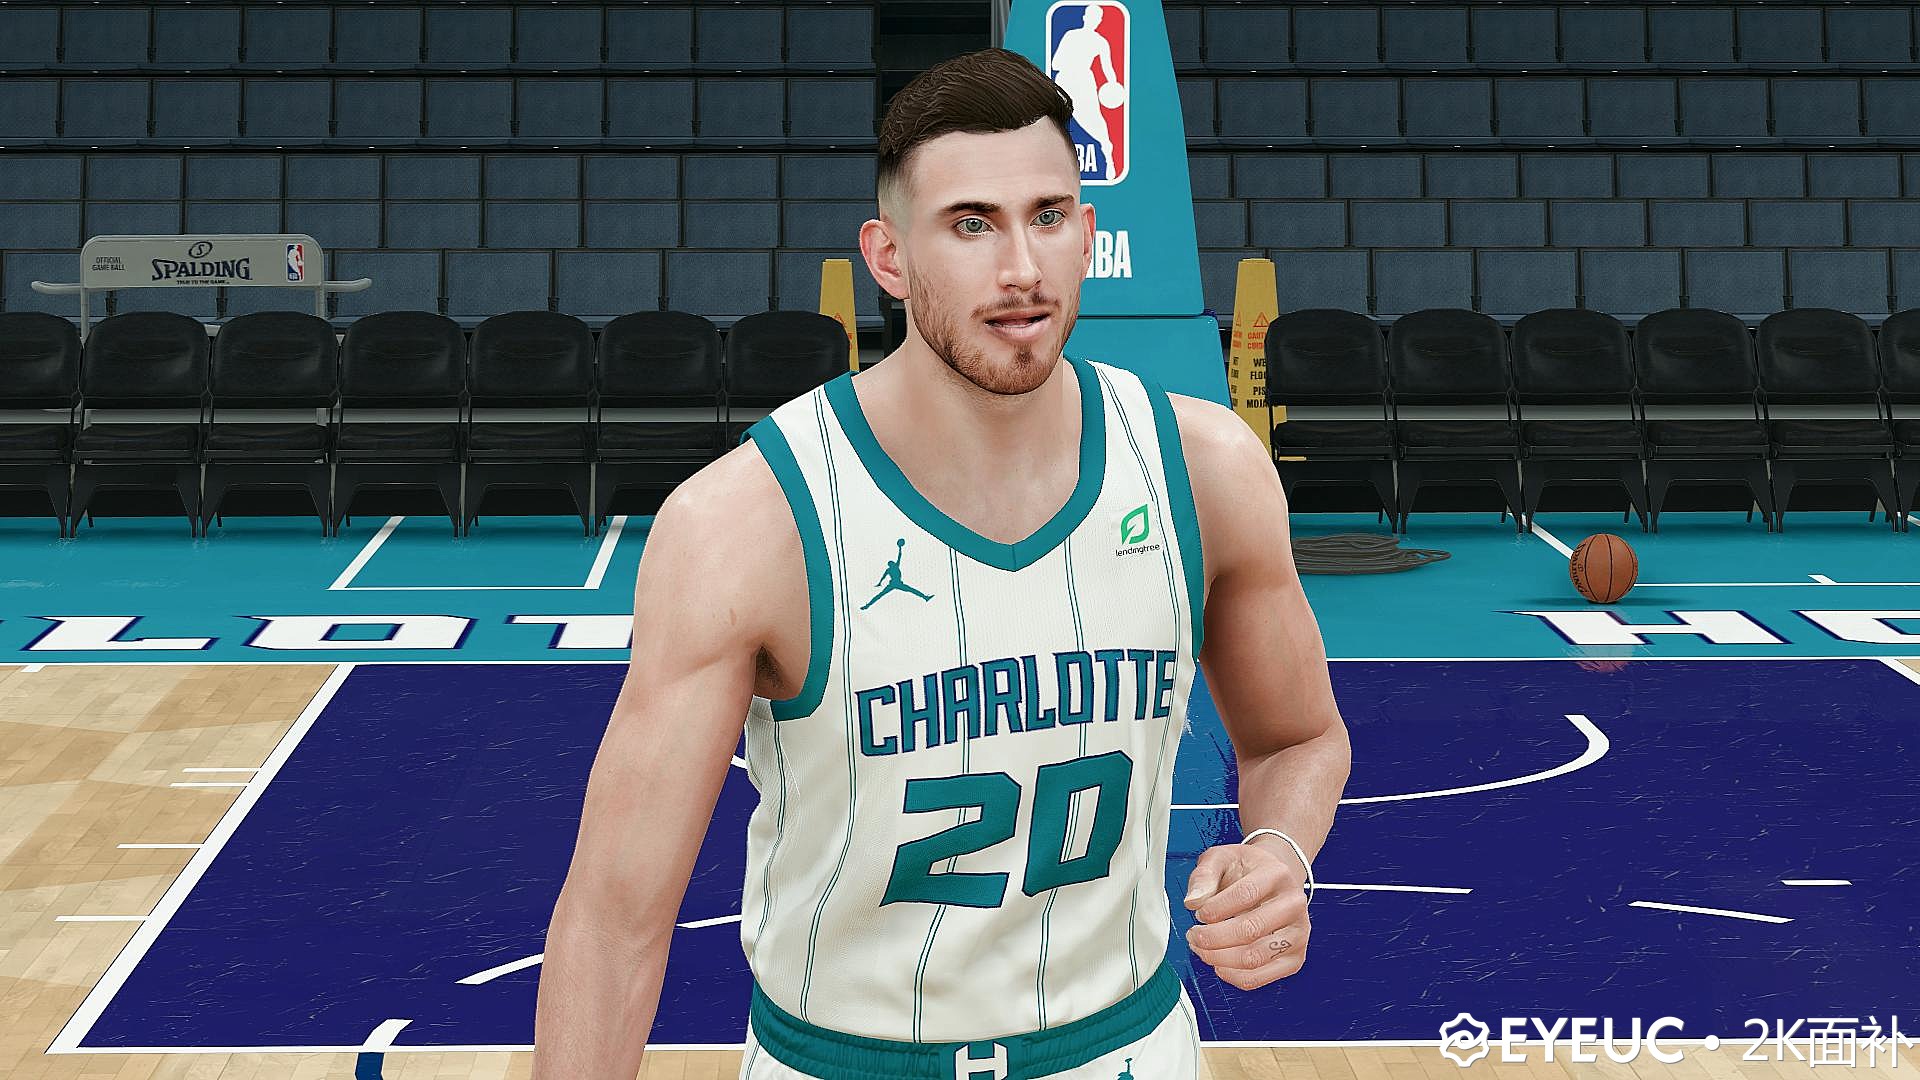 Gordon Hayward HD Face and Body Model By vincecarter15 [FOR 2K20]